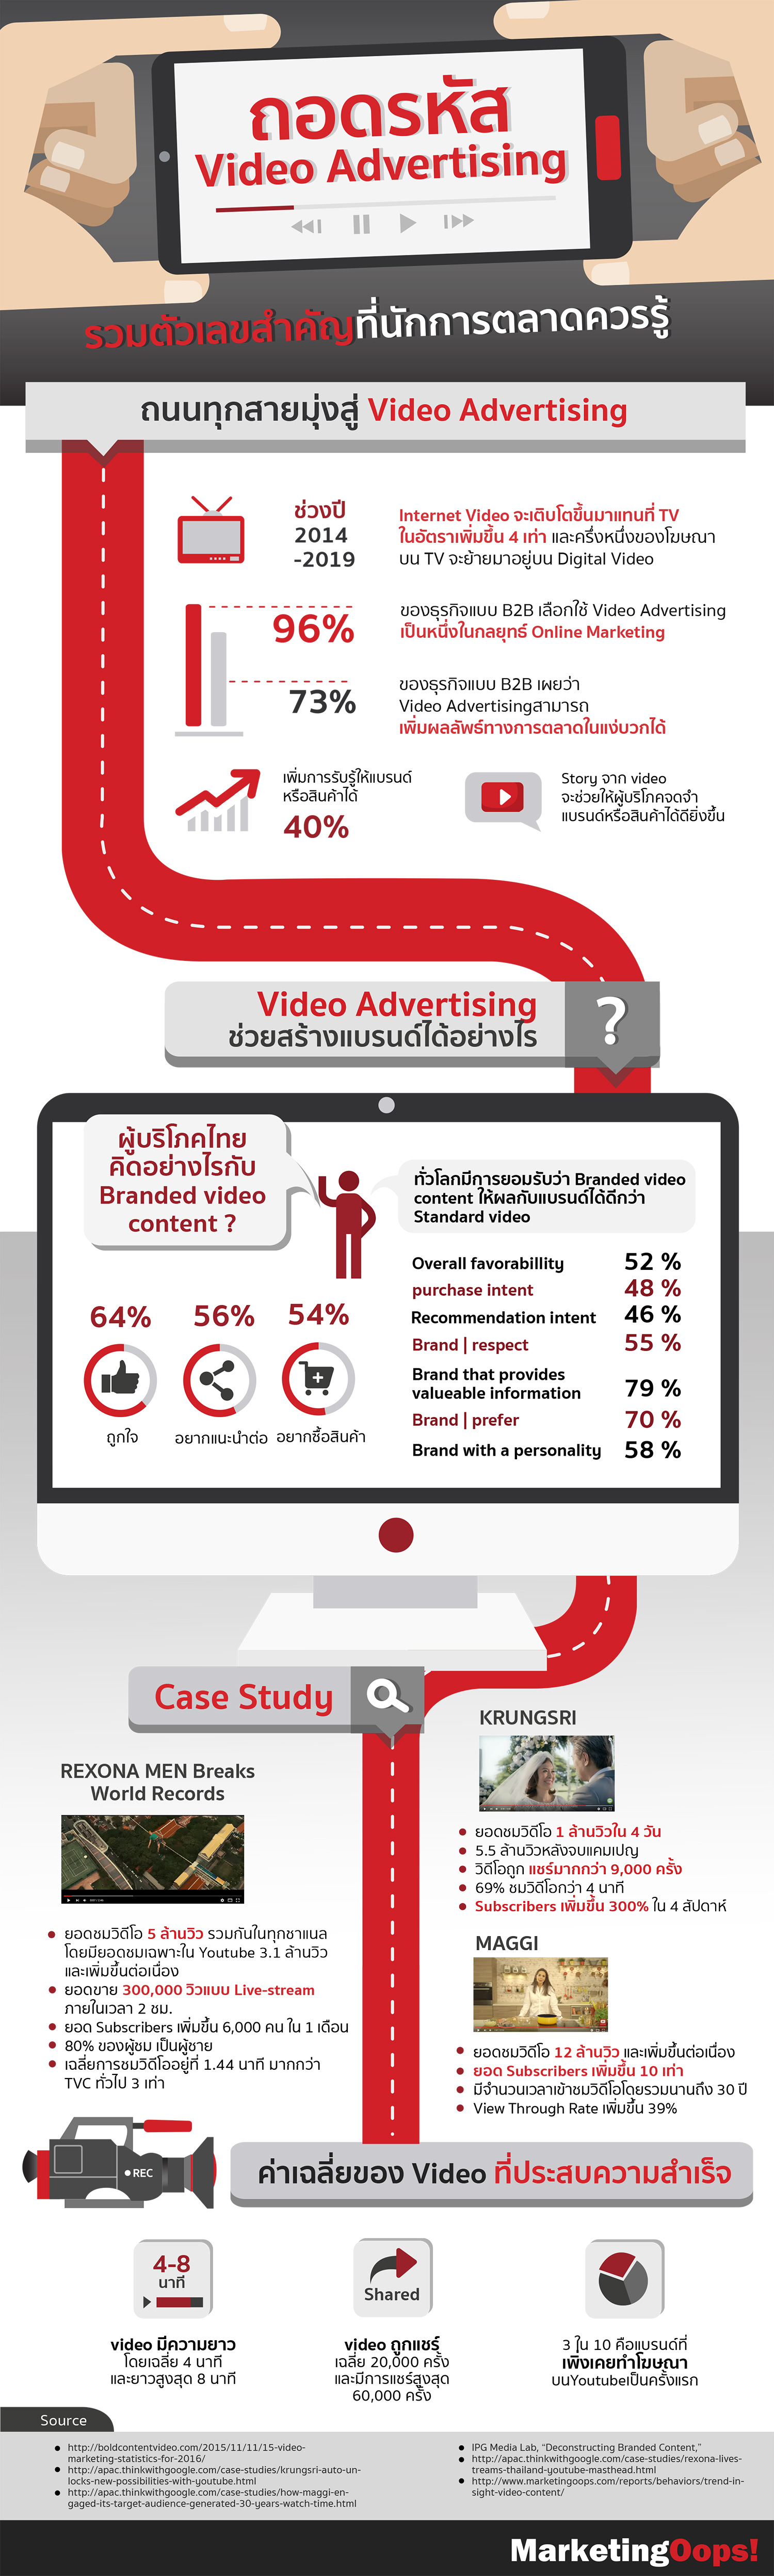 video-advertising-infographic